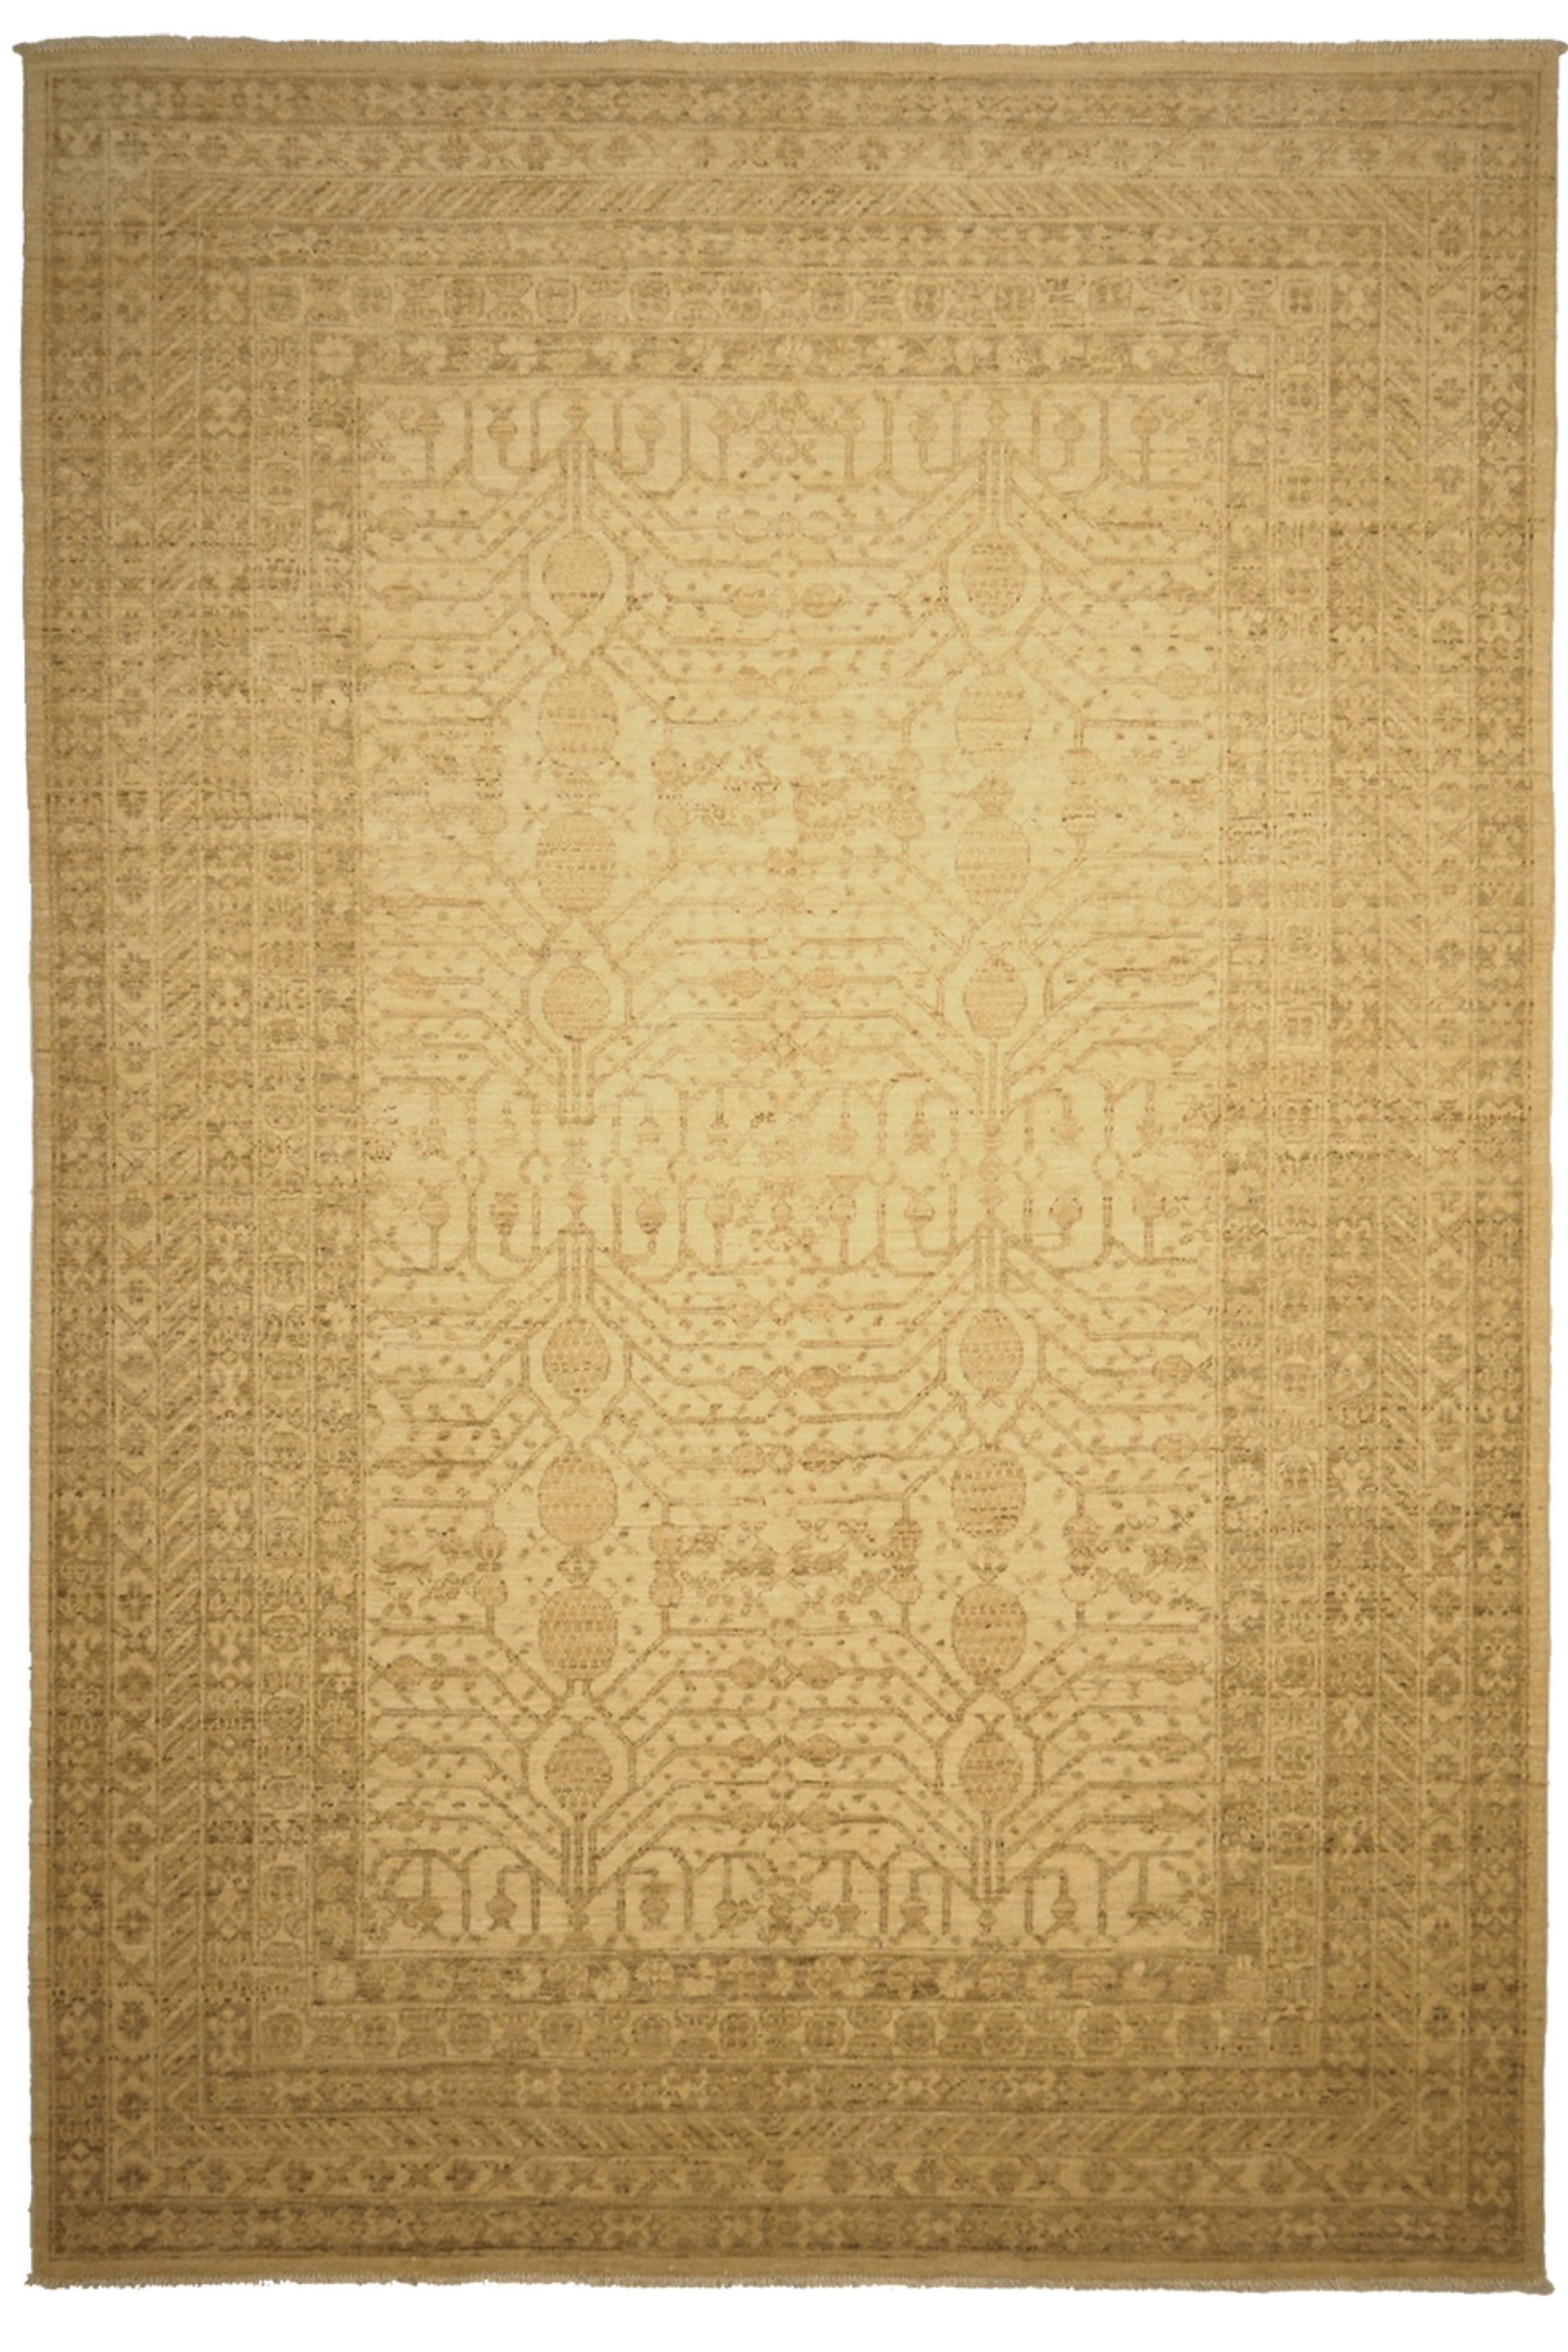 Luxury gold authentic Persian rug